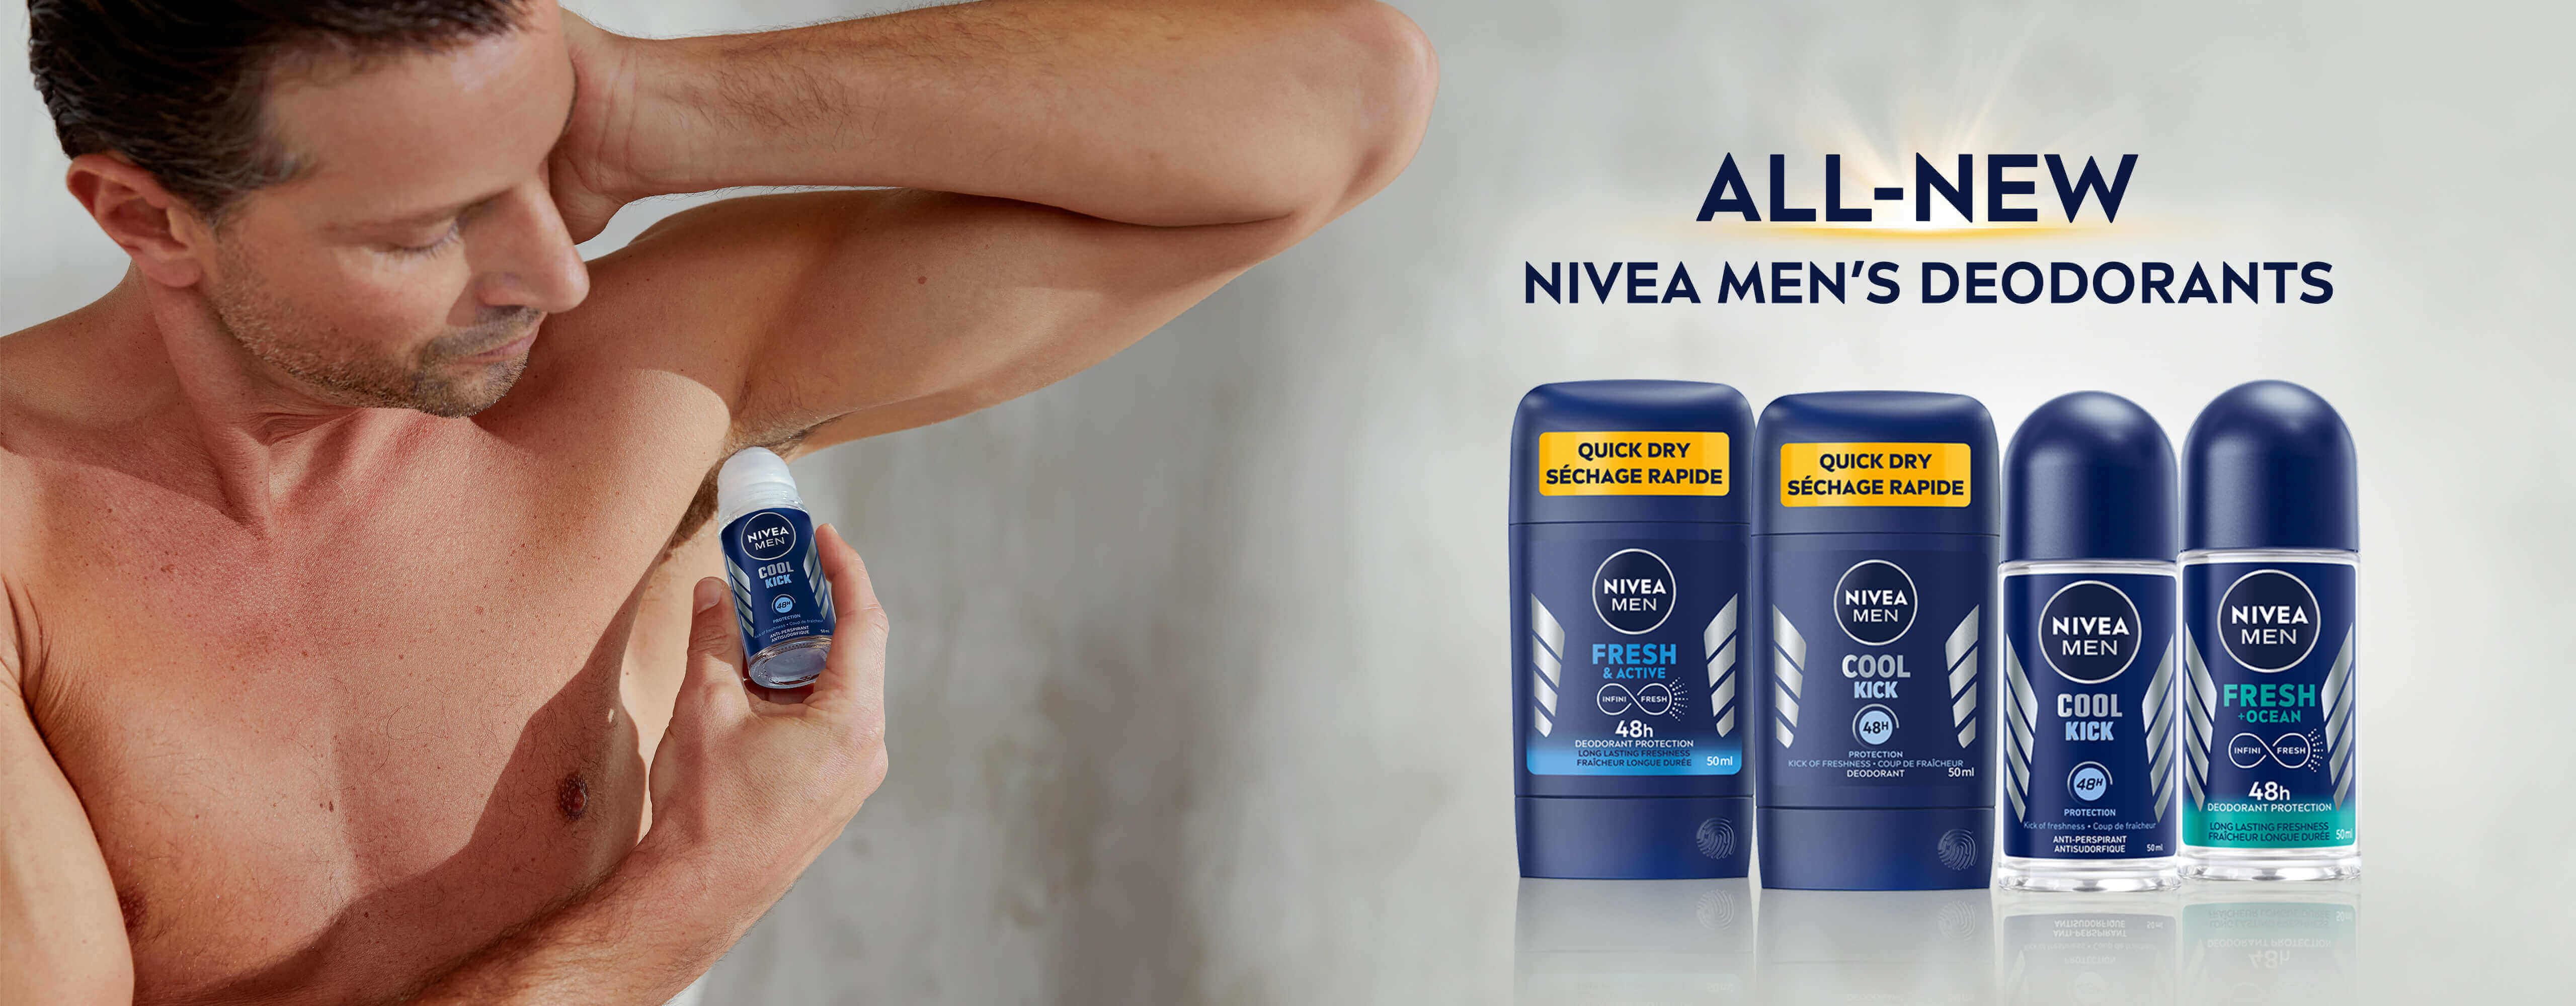 View of a shirtless person applying Nivea Men deodorant to their underarm.